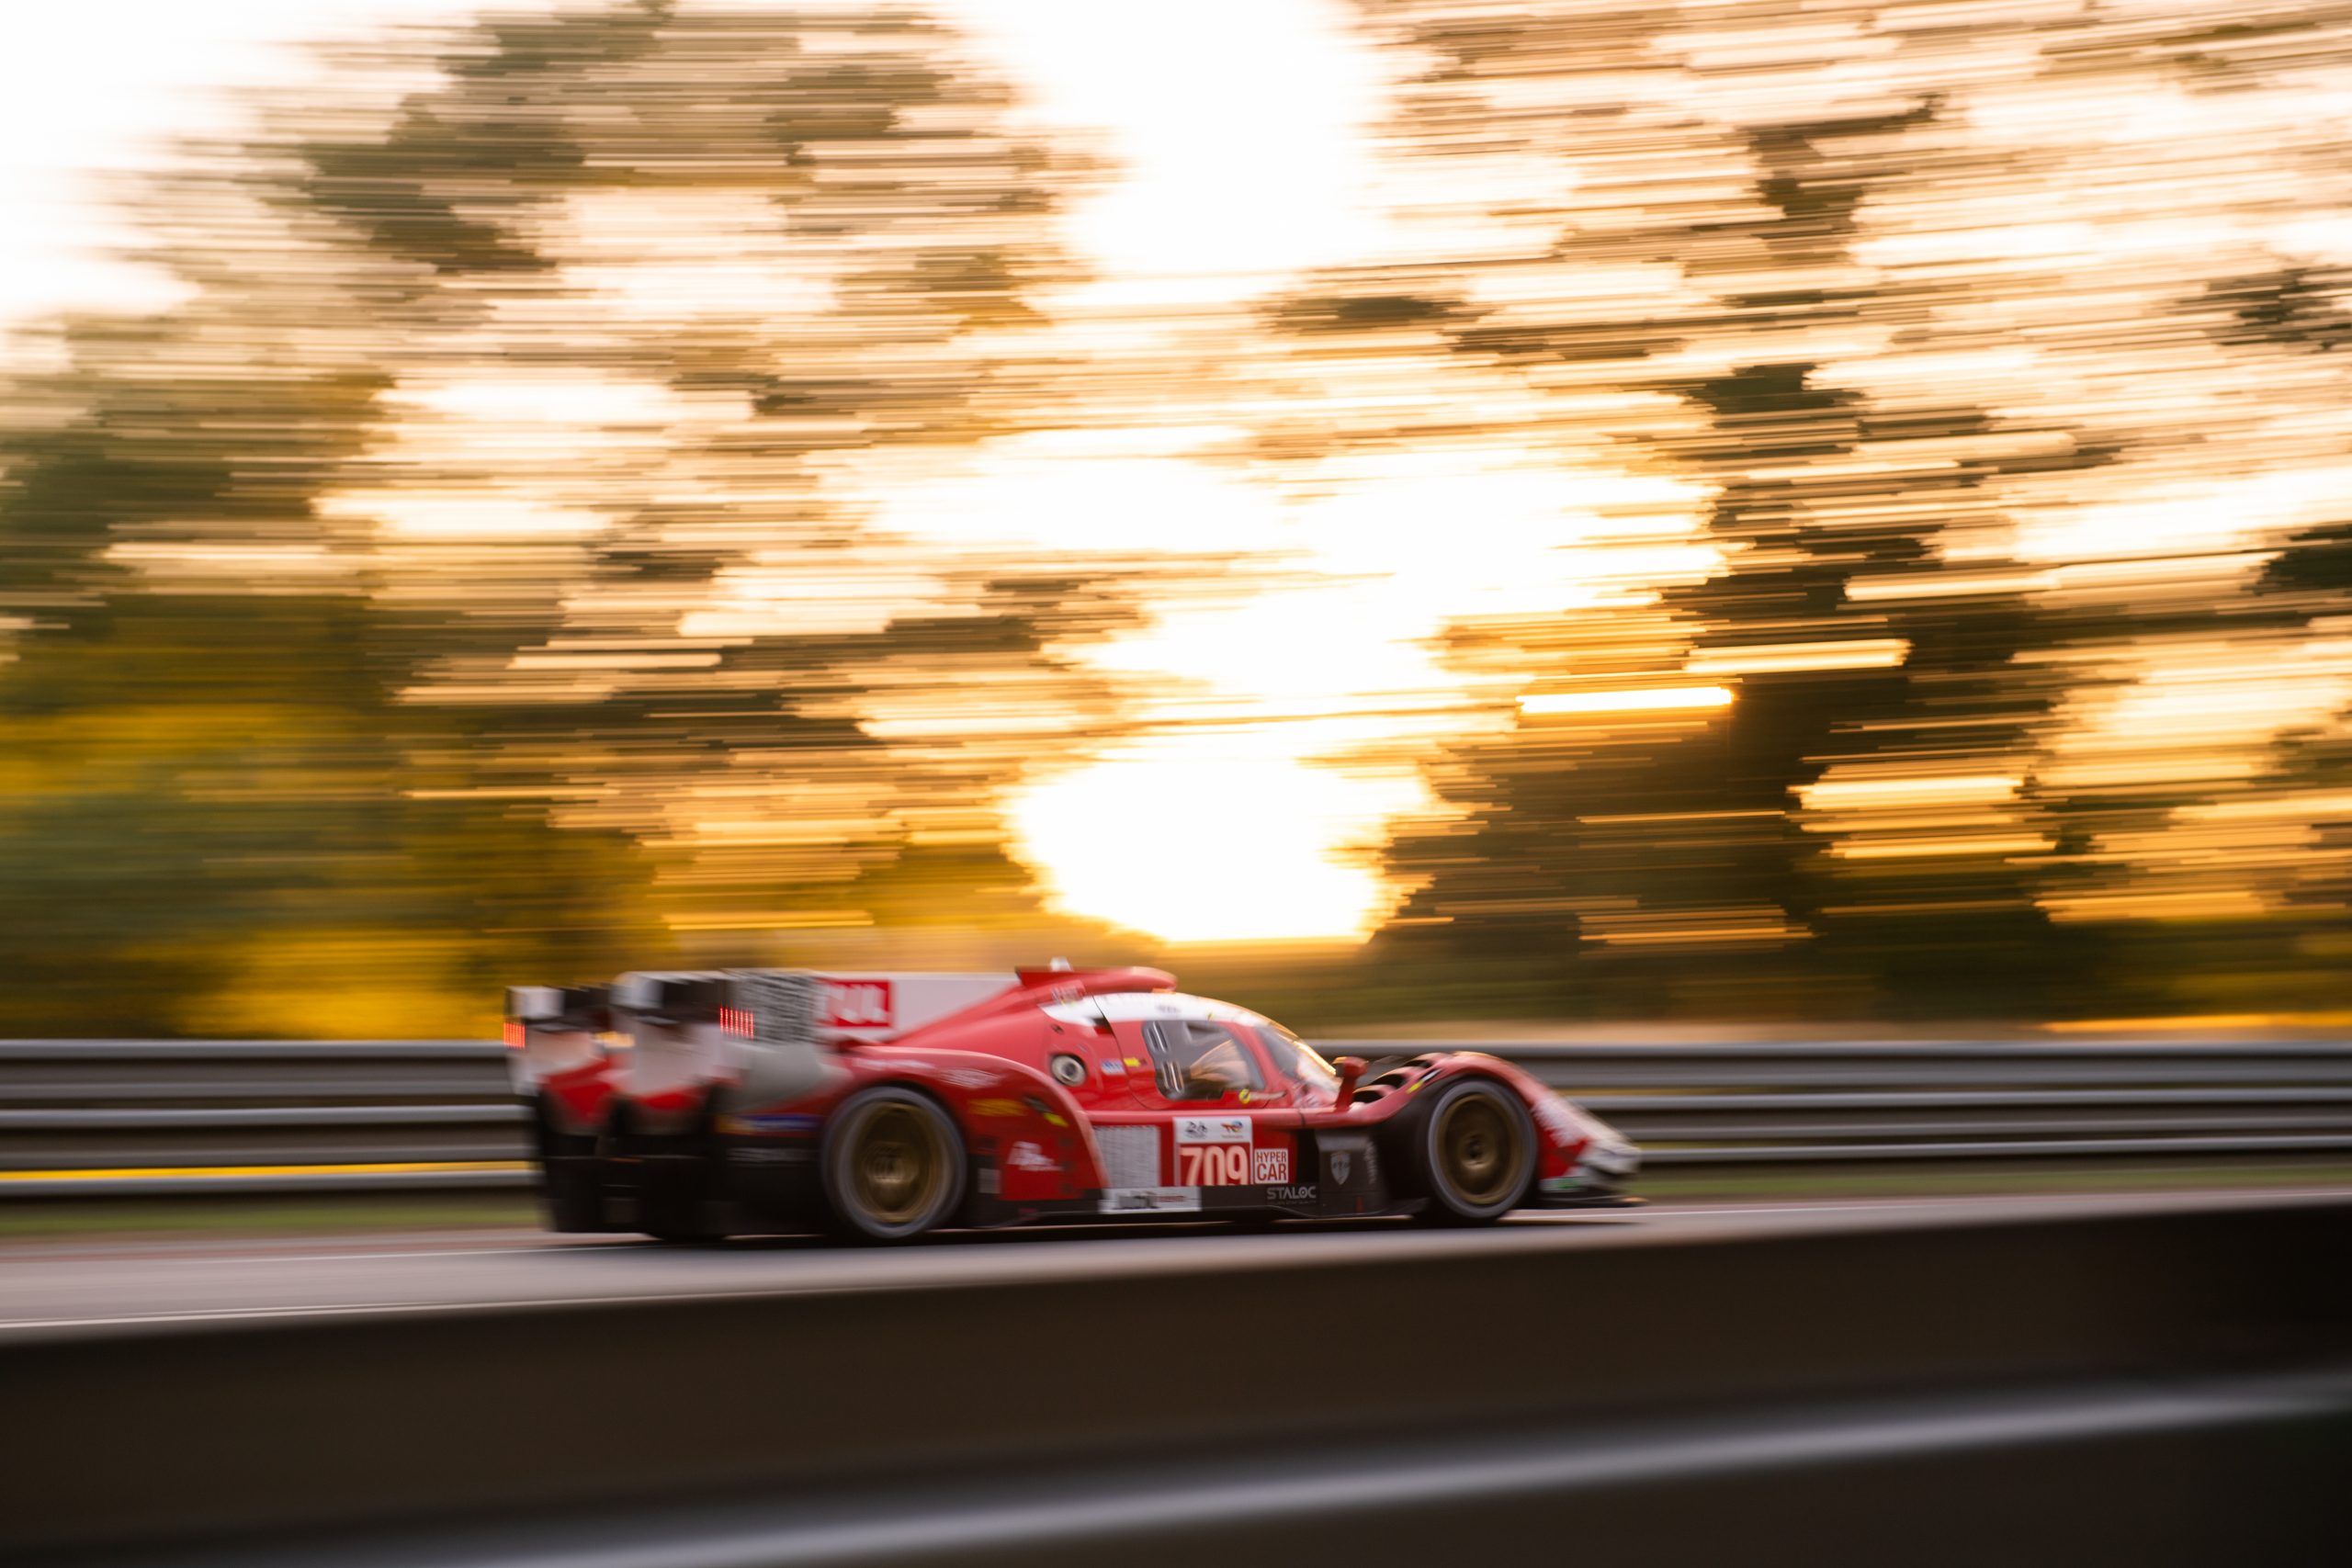 American underdog Glickenhaus Racing storms to a podium at Le Mans